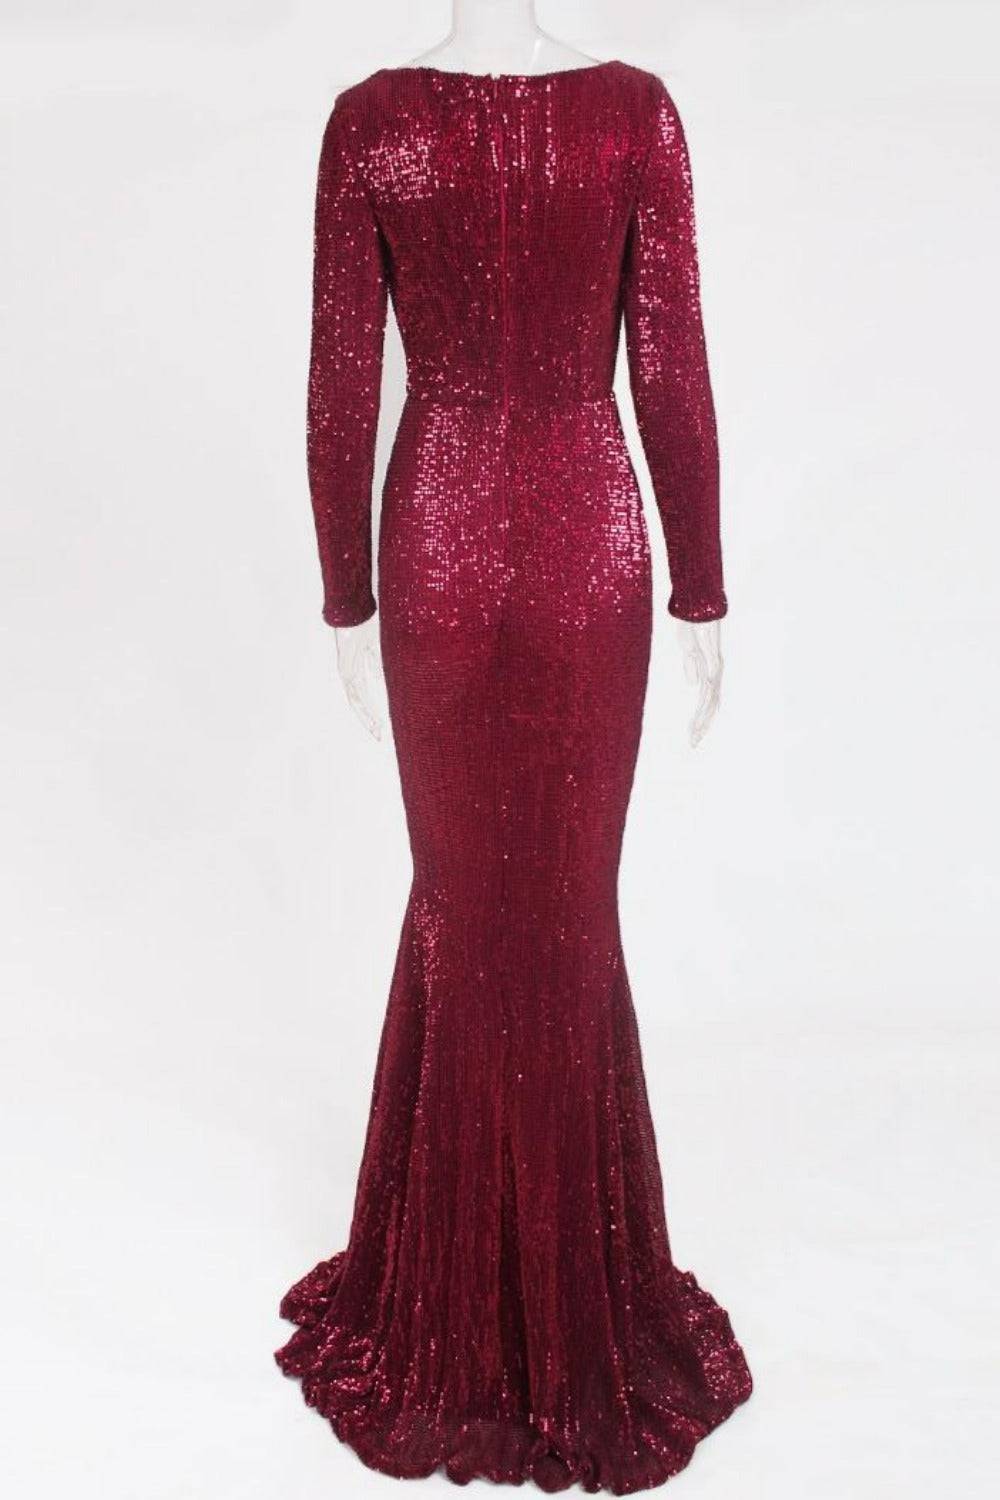 Red Long Sleeve Sequins Mermaid Maxi Dress - TGC Boutique - Red Evening Gown